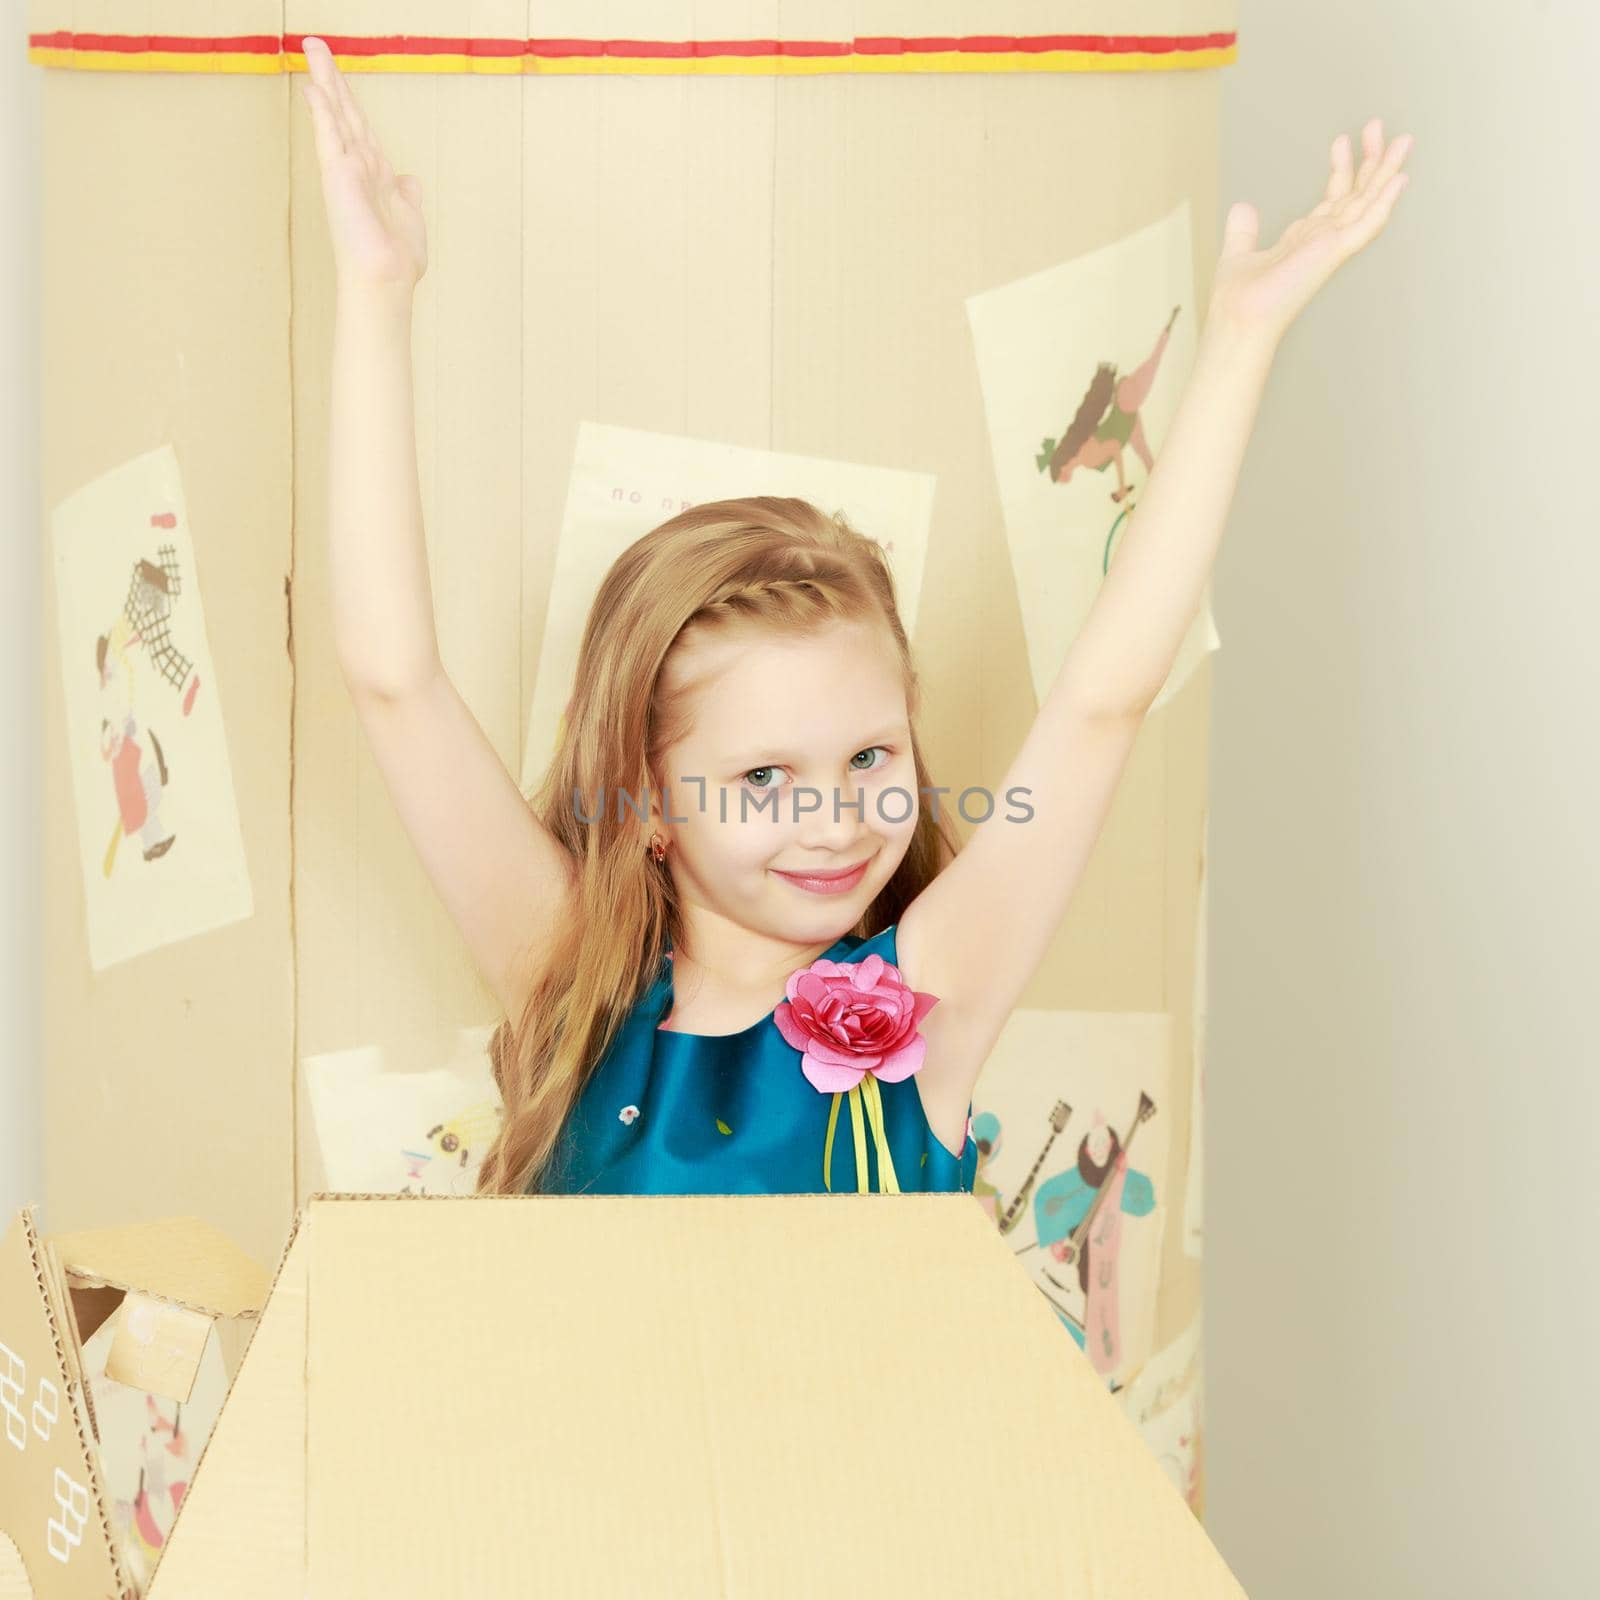 Beautiful little girl with long blond hair in a smart blue dress. Girl playing with a toy wooden car in a cardboard house.